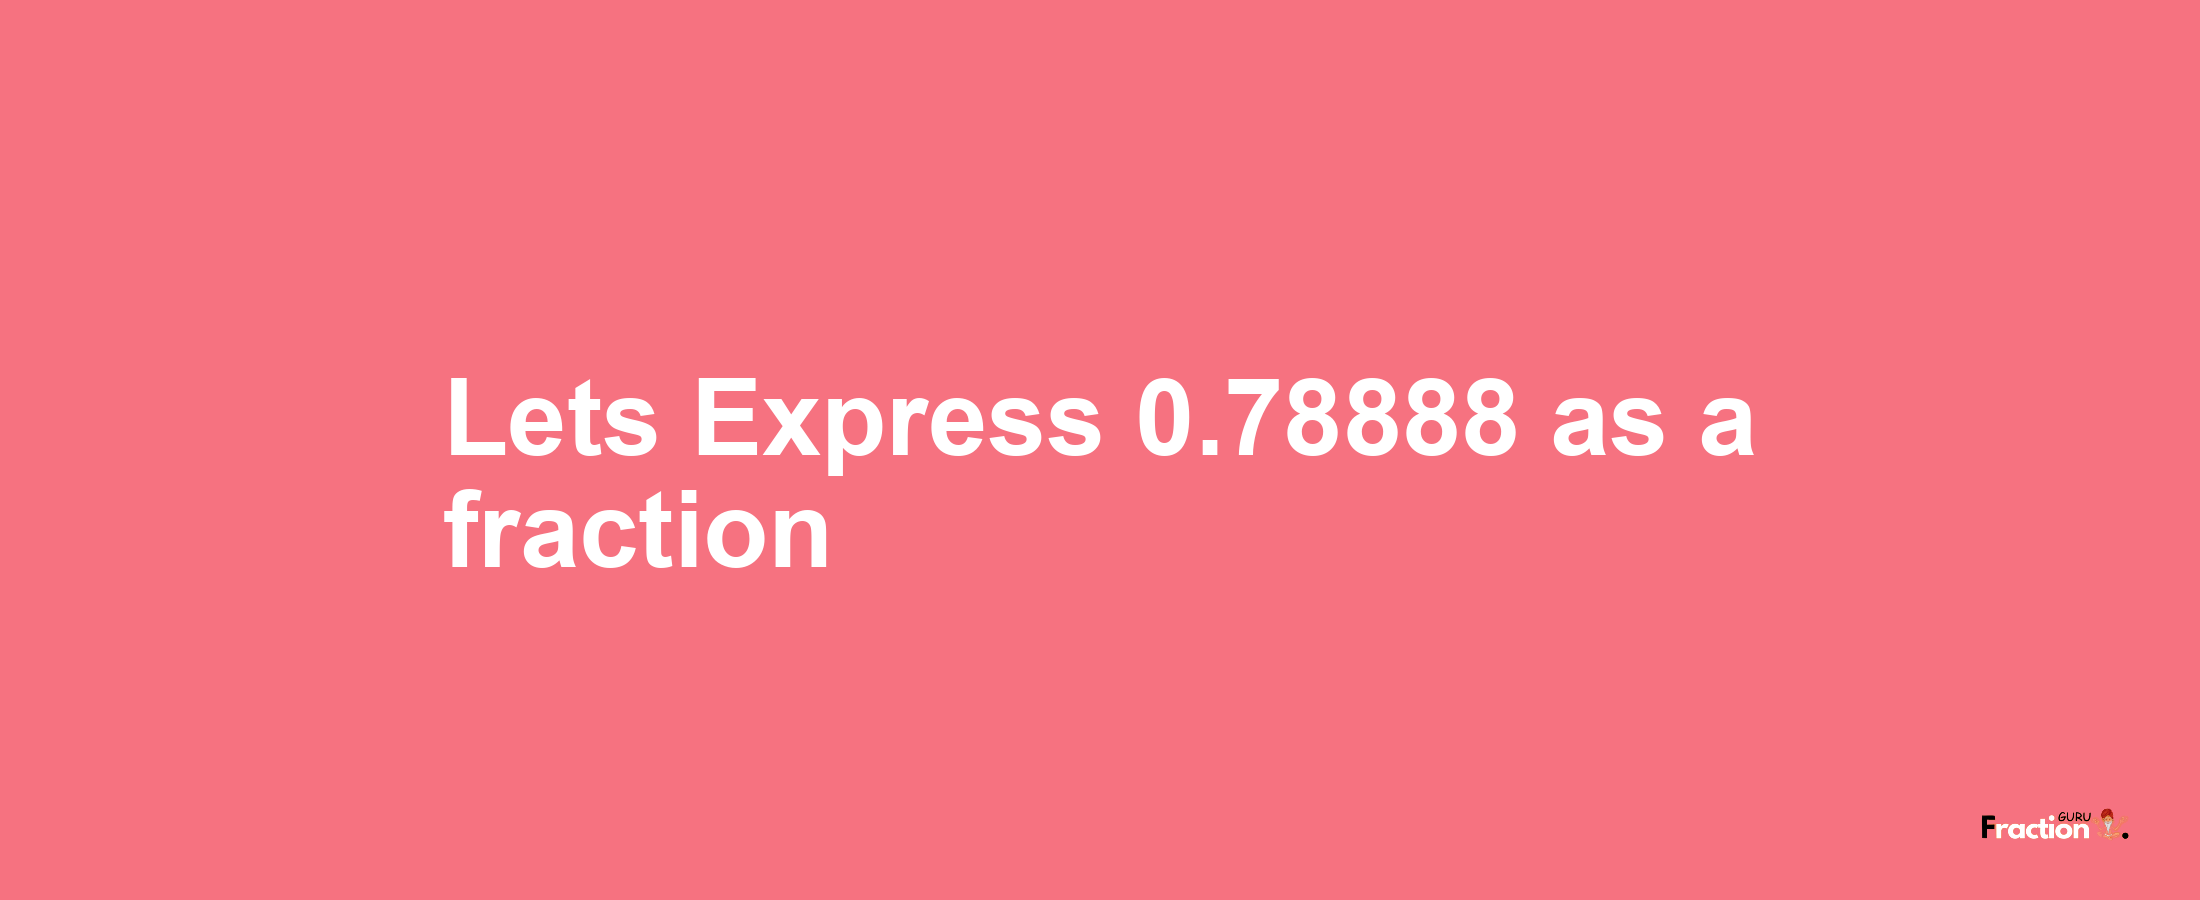 Lets Express 0.78888 as afraction